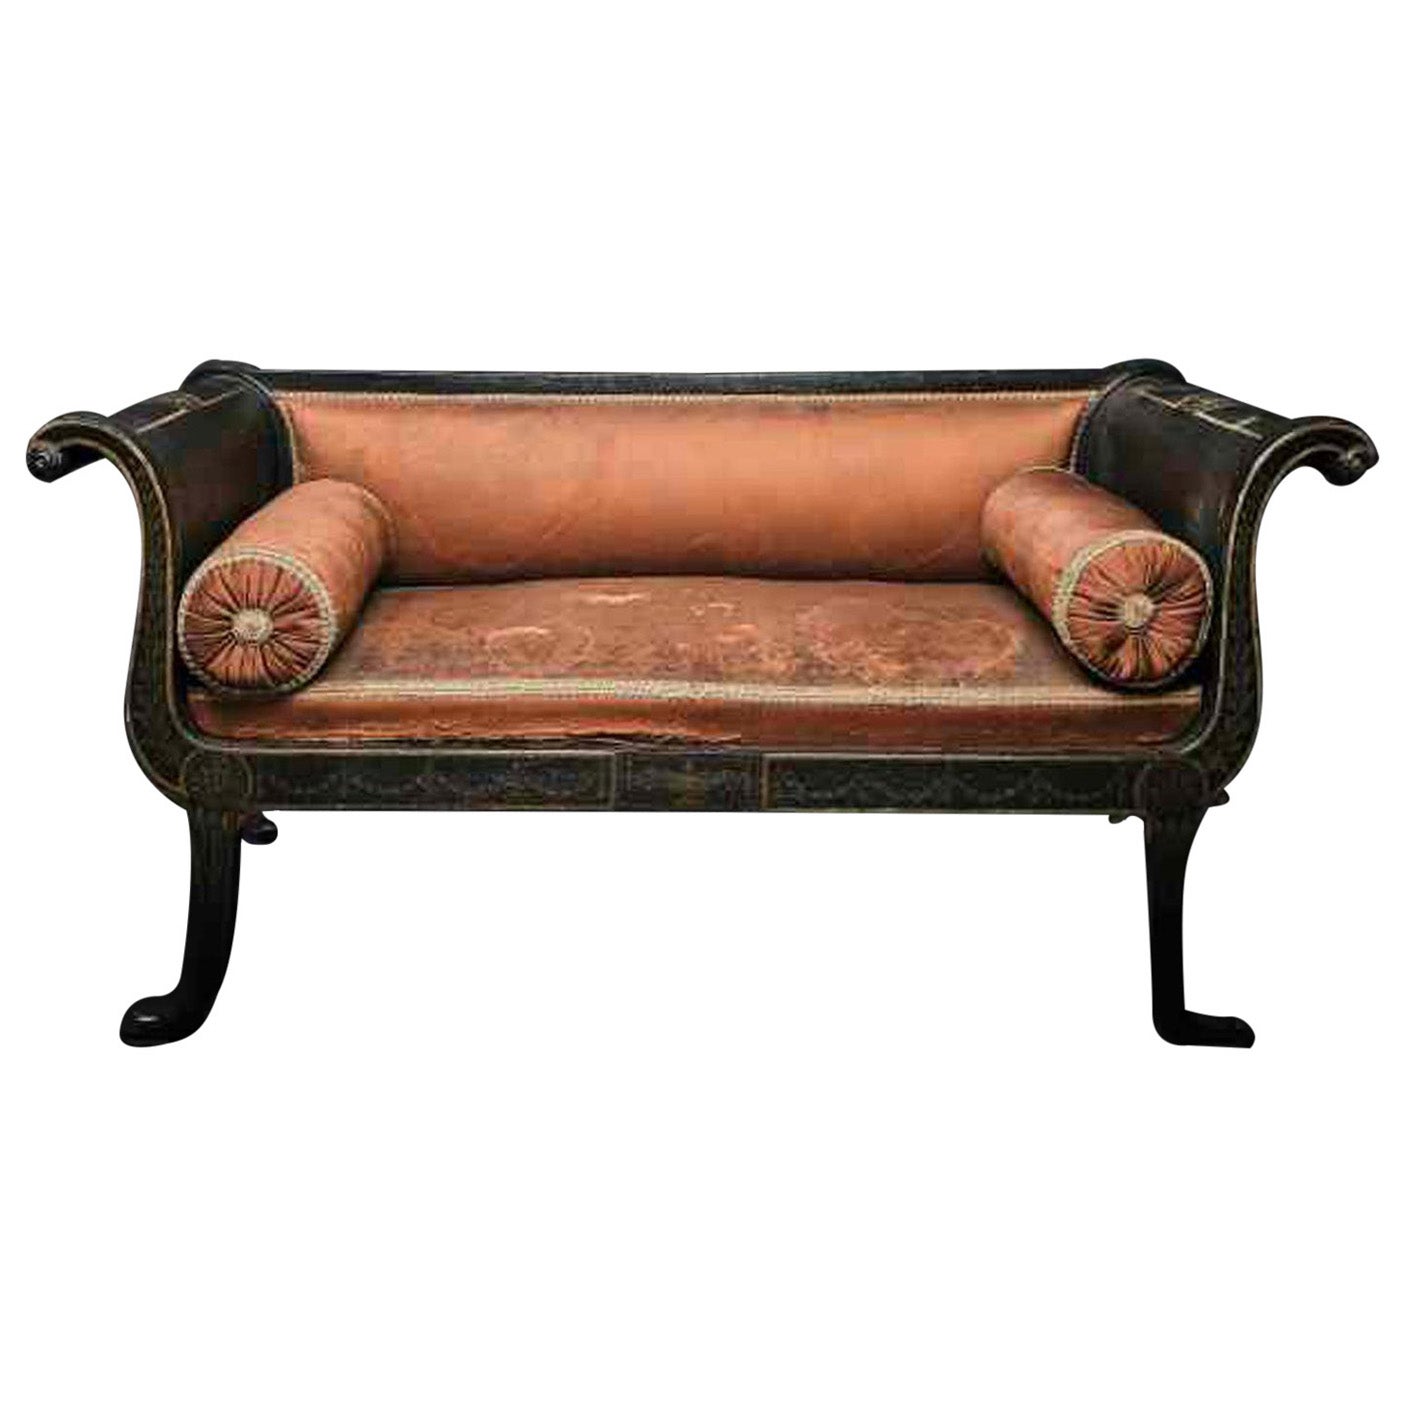 Beautiful Bench Finely Painted in Grisaille, Northern Europe, Early 19th Century For Sale